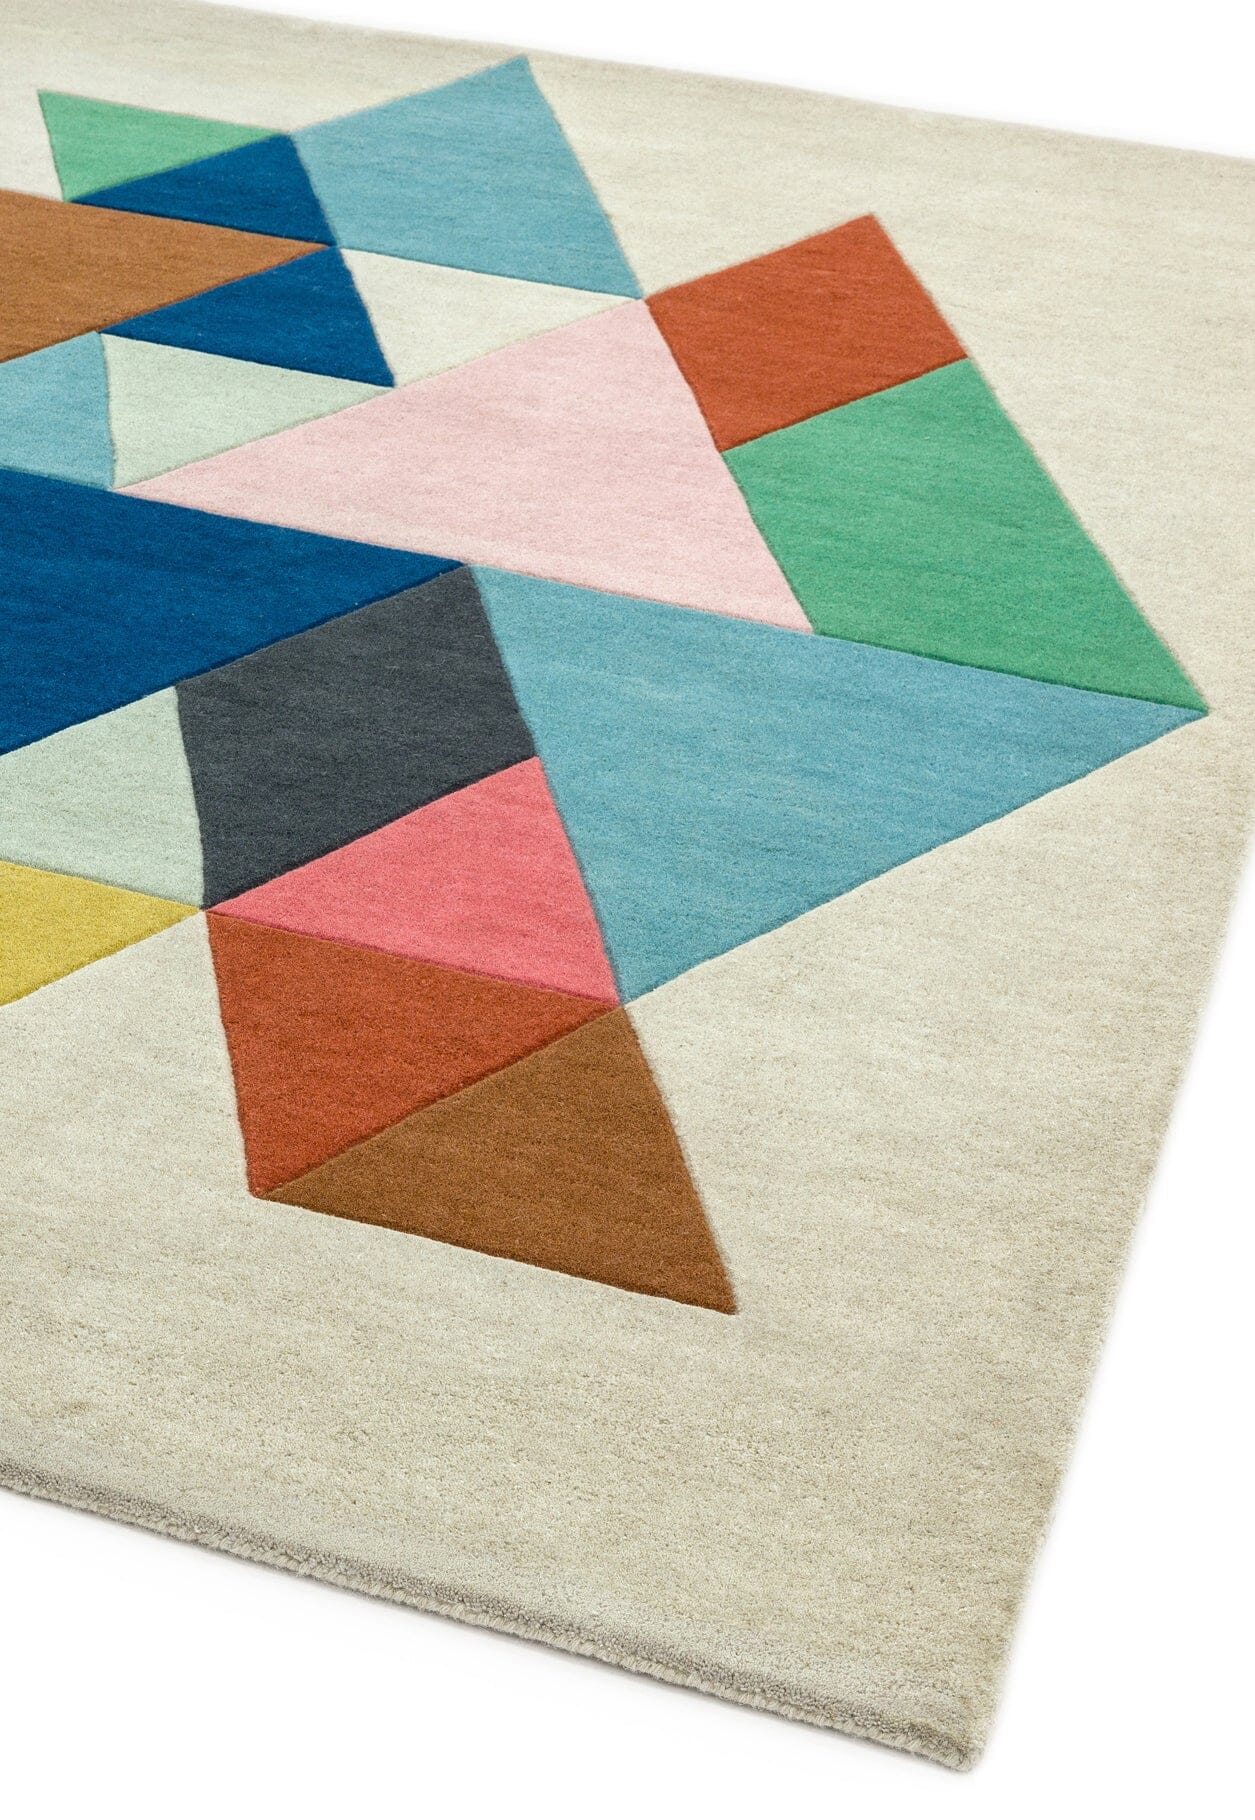 Asiatic Carpets Reef Handtufted Rug Triangle Multi - 120 x 170cm